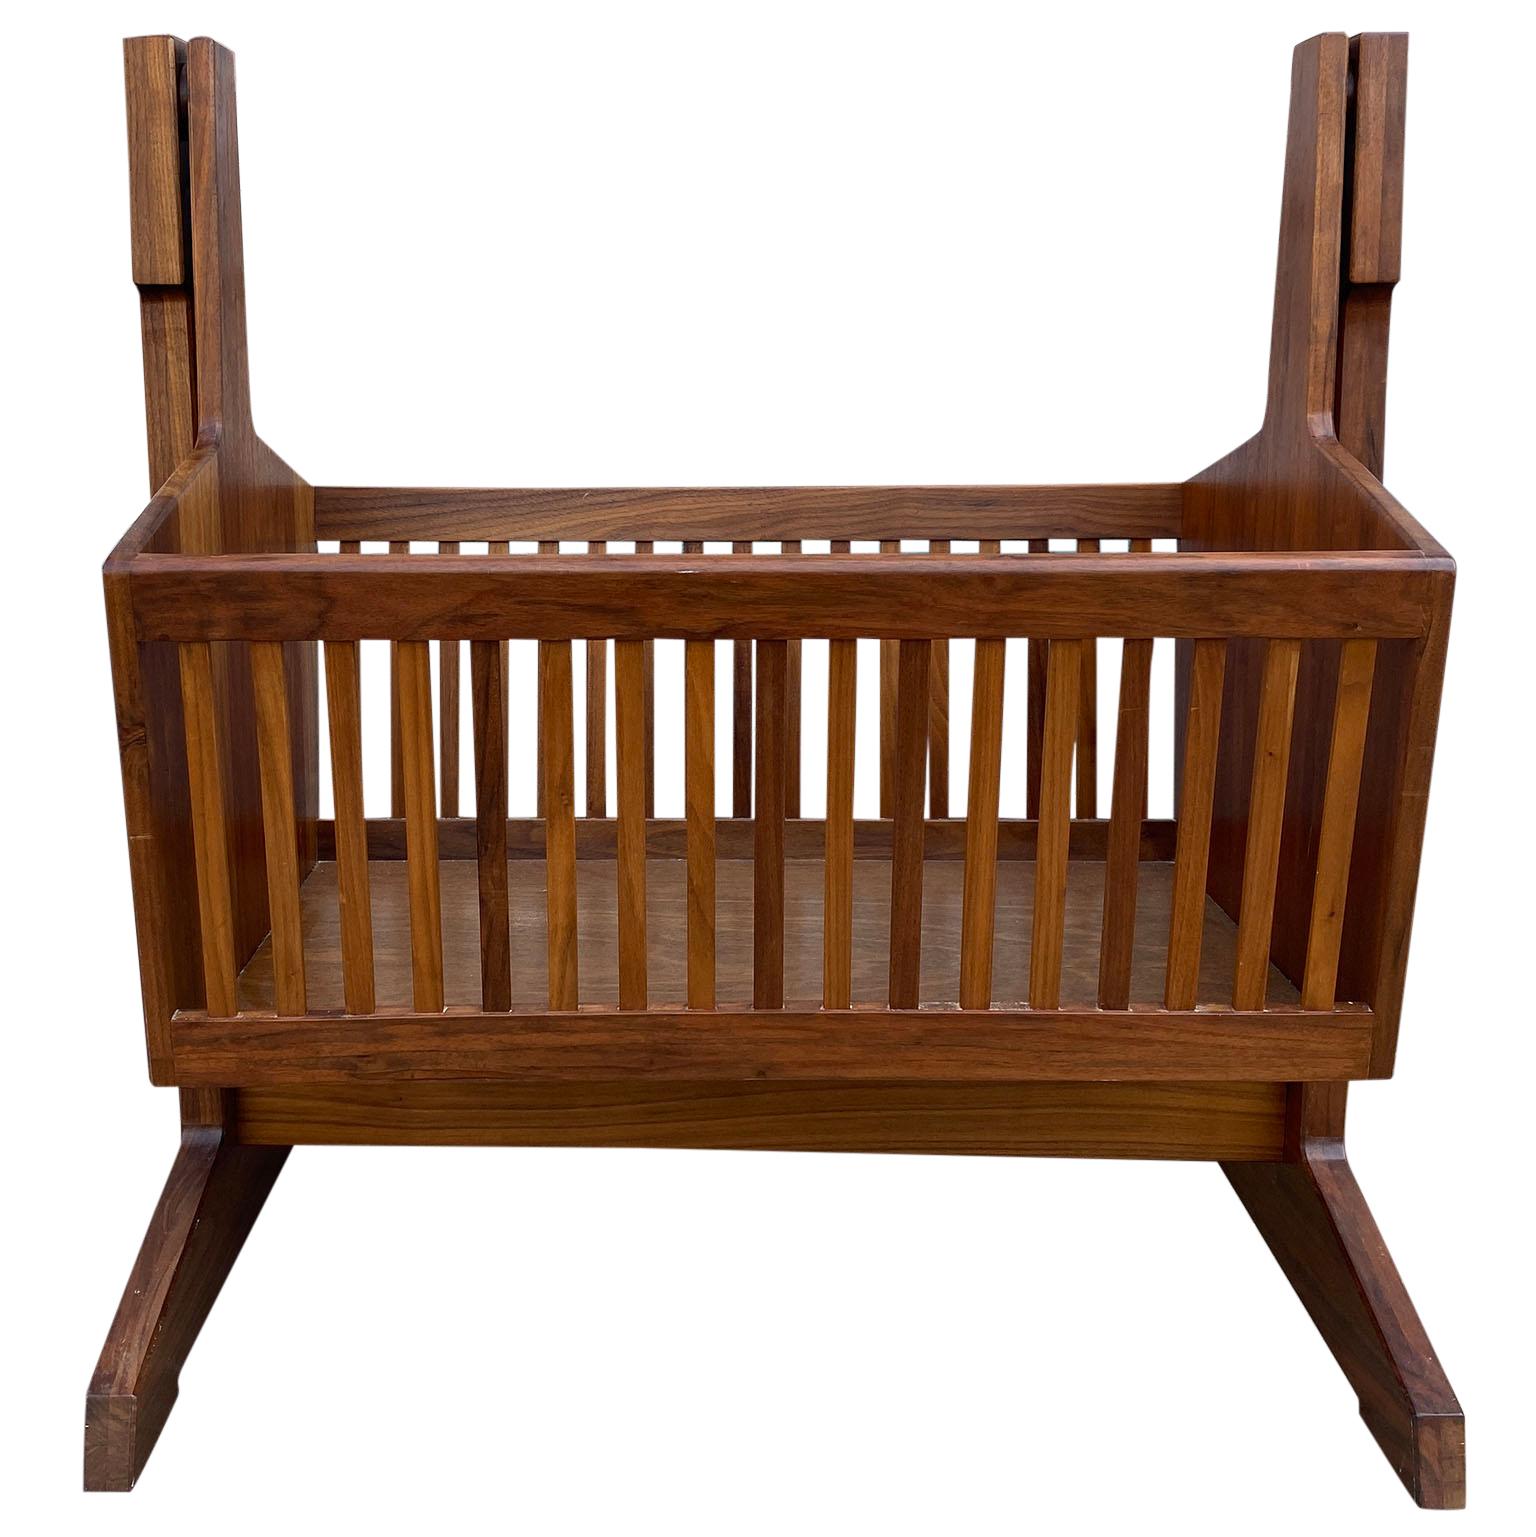 Beautiful solid walnut studio craft baby swinging bassinet crib. Amazing woodwork, crib can be placed in a fixed position mode or Manual swing mode. Very clean in amazing vintage condition. All sold wood. Made in style of Thomas Moser or George